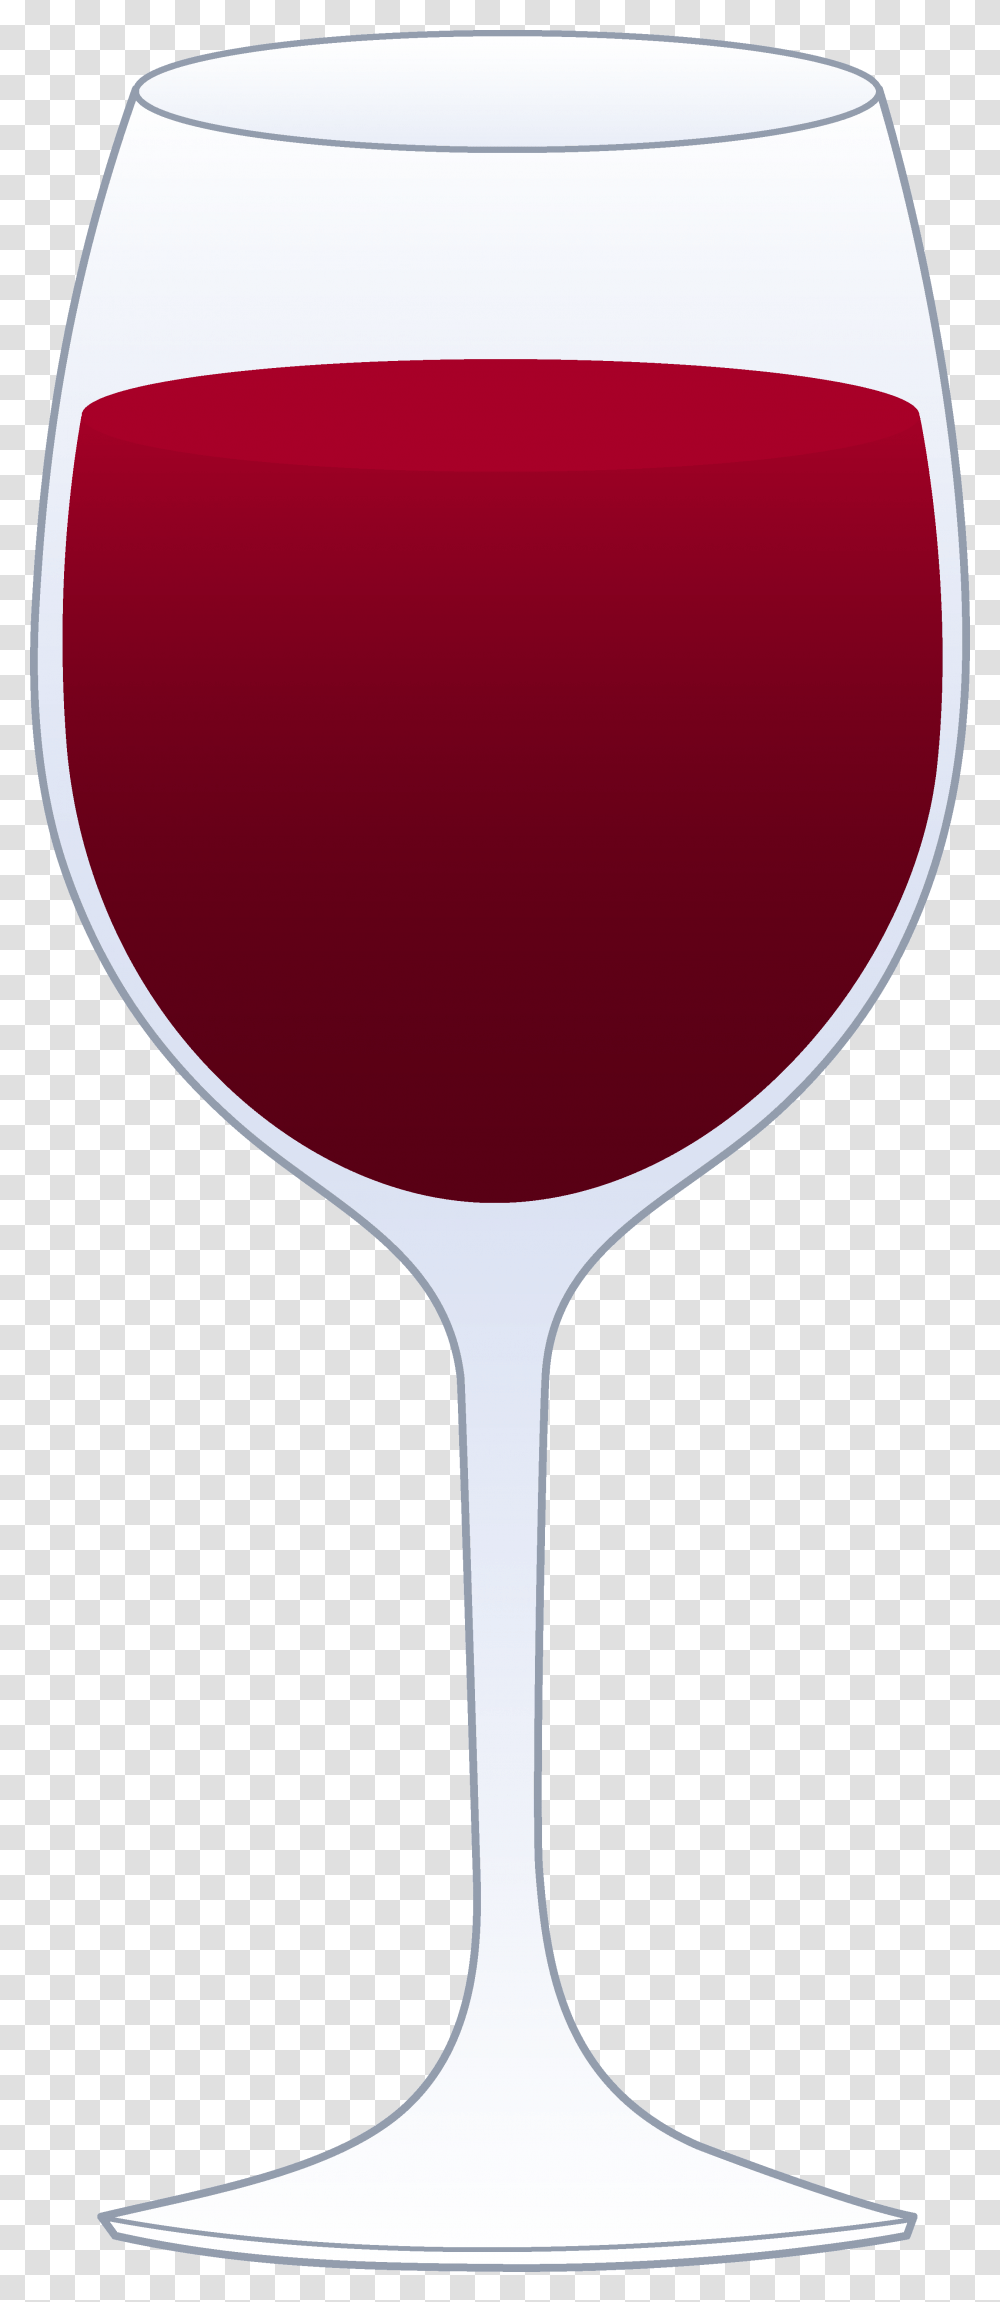 Glass And Wines Clipart Of Wine Information And Personal Red Wine Clip Art, Alcohol, Beverage, Drink, Wine Glass Transparent Png